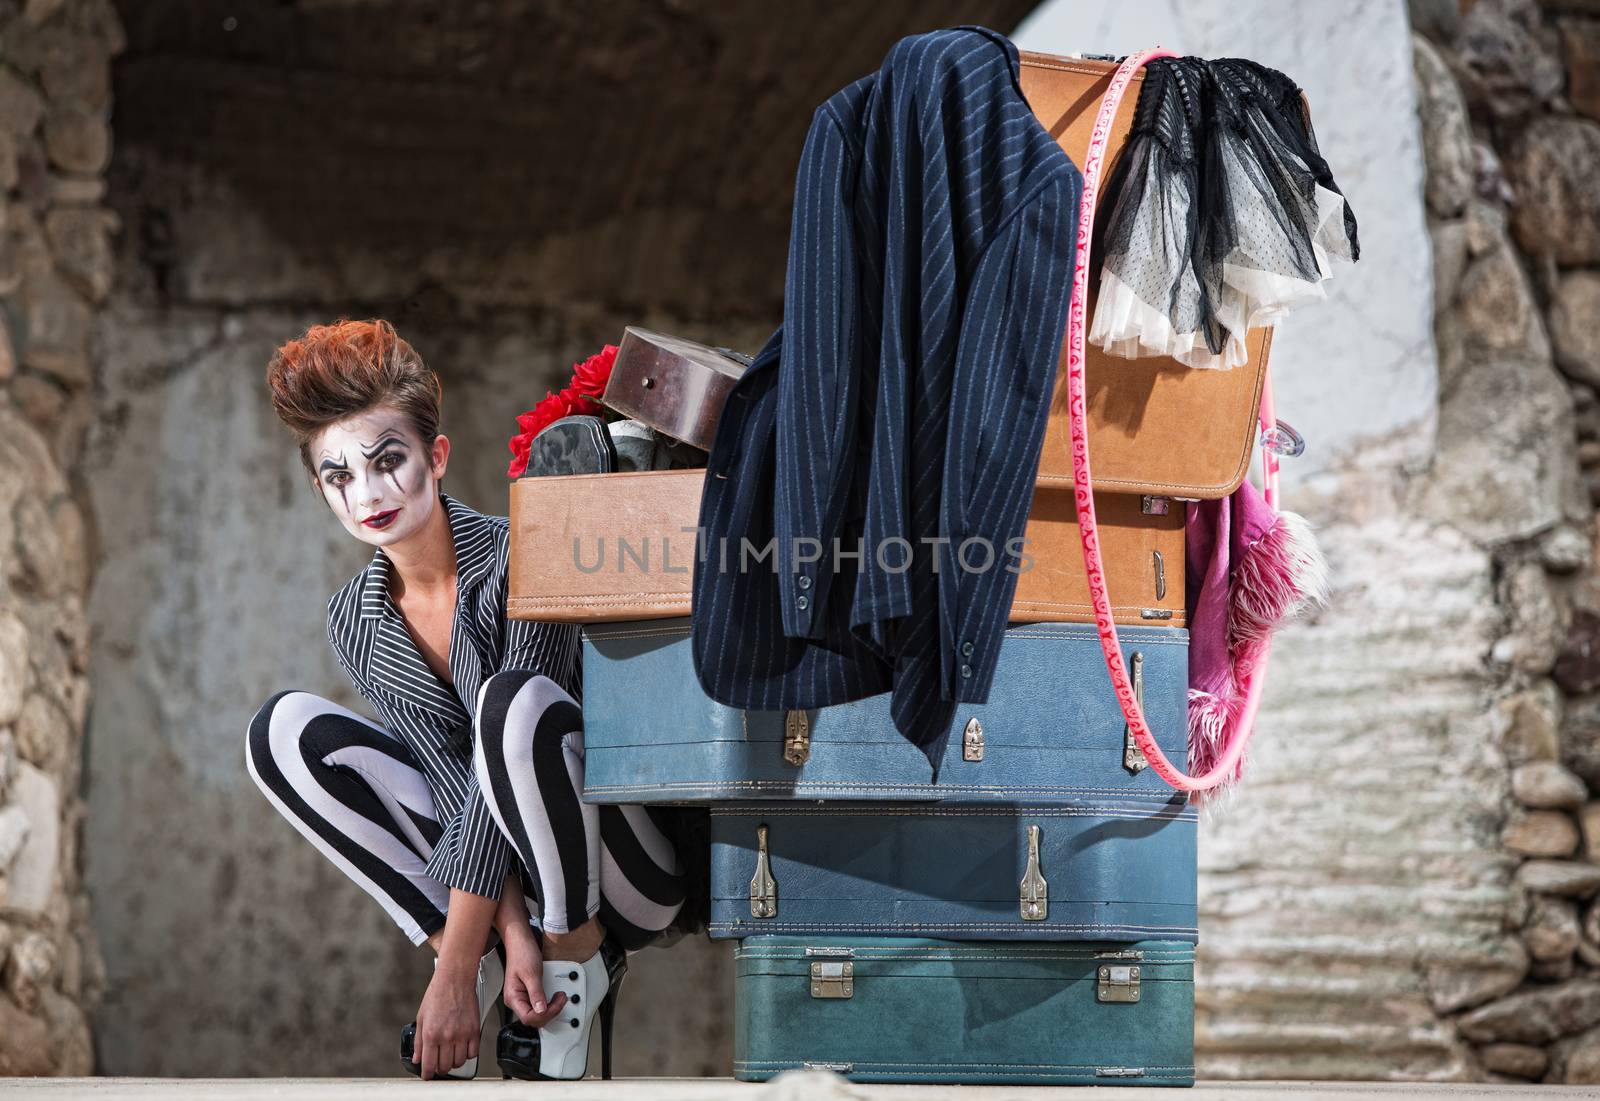 Grinning Clown Near Suitcases by Creatista